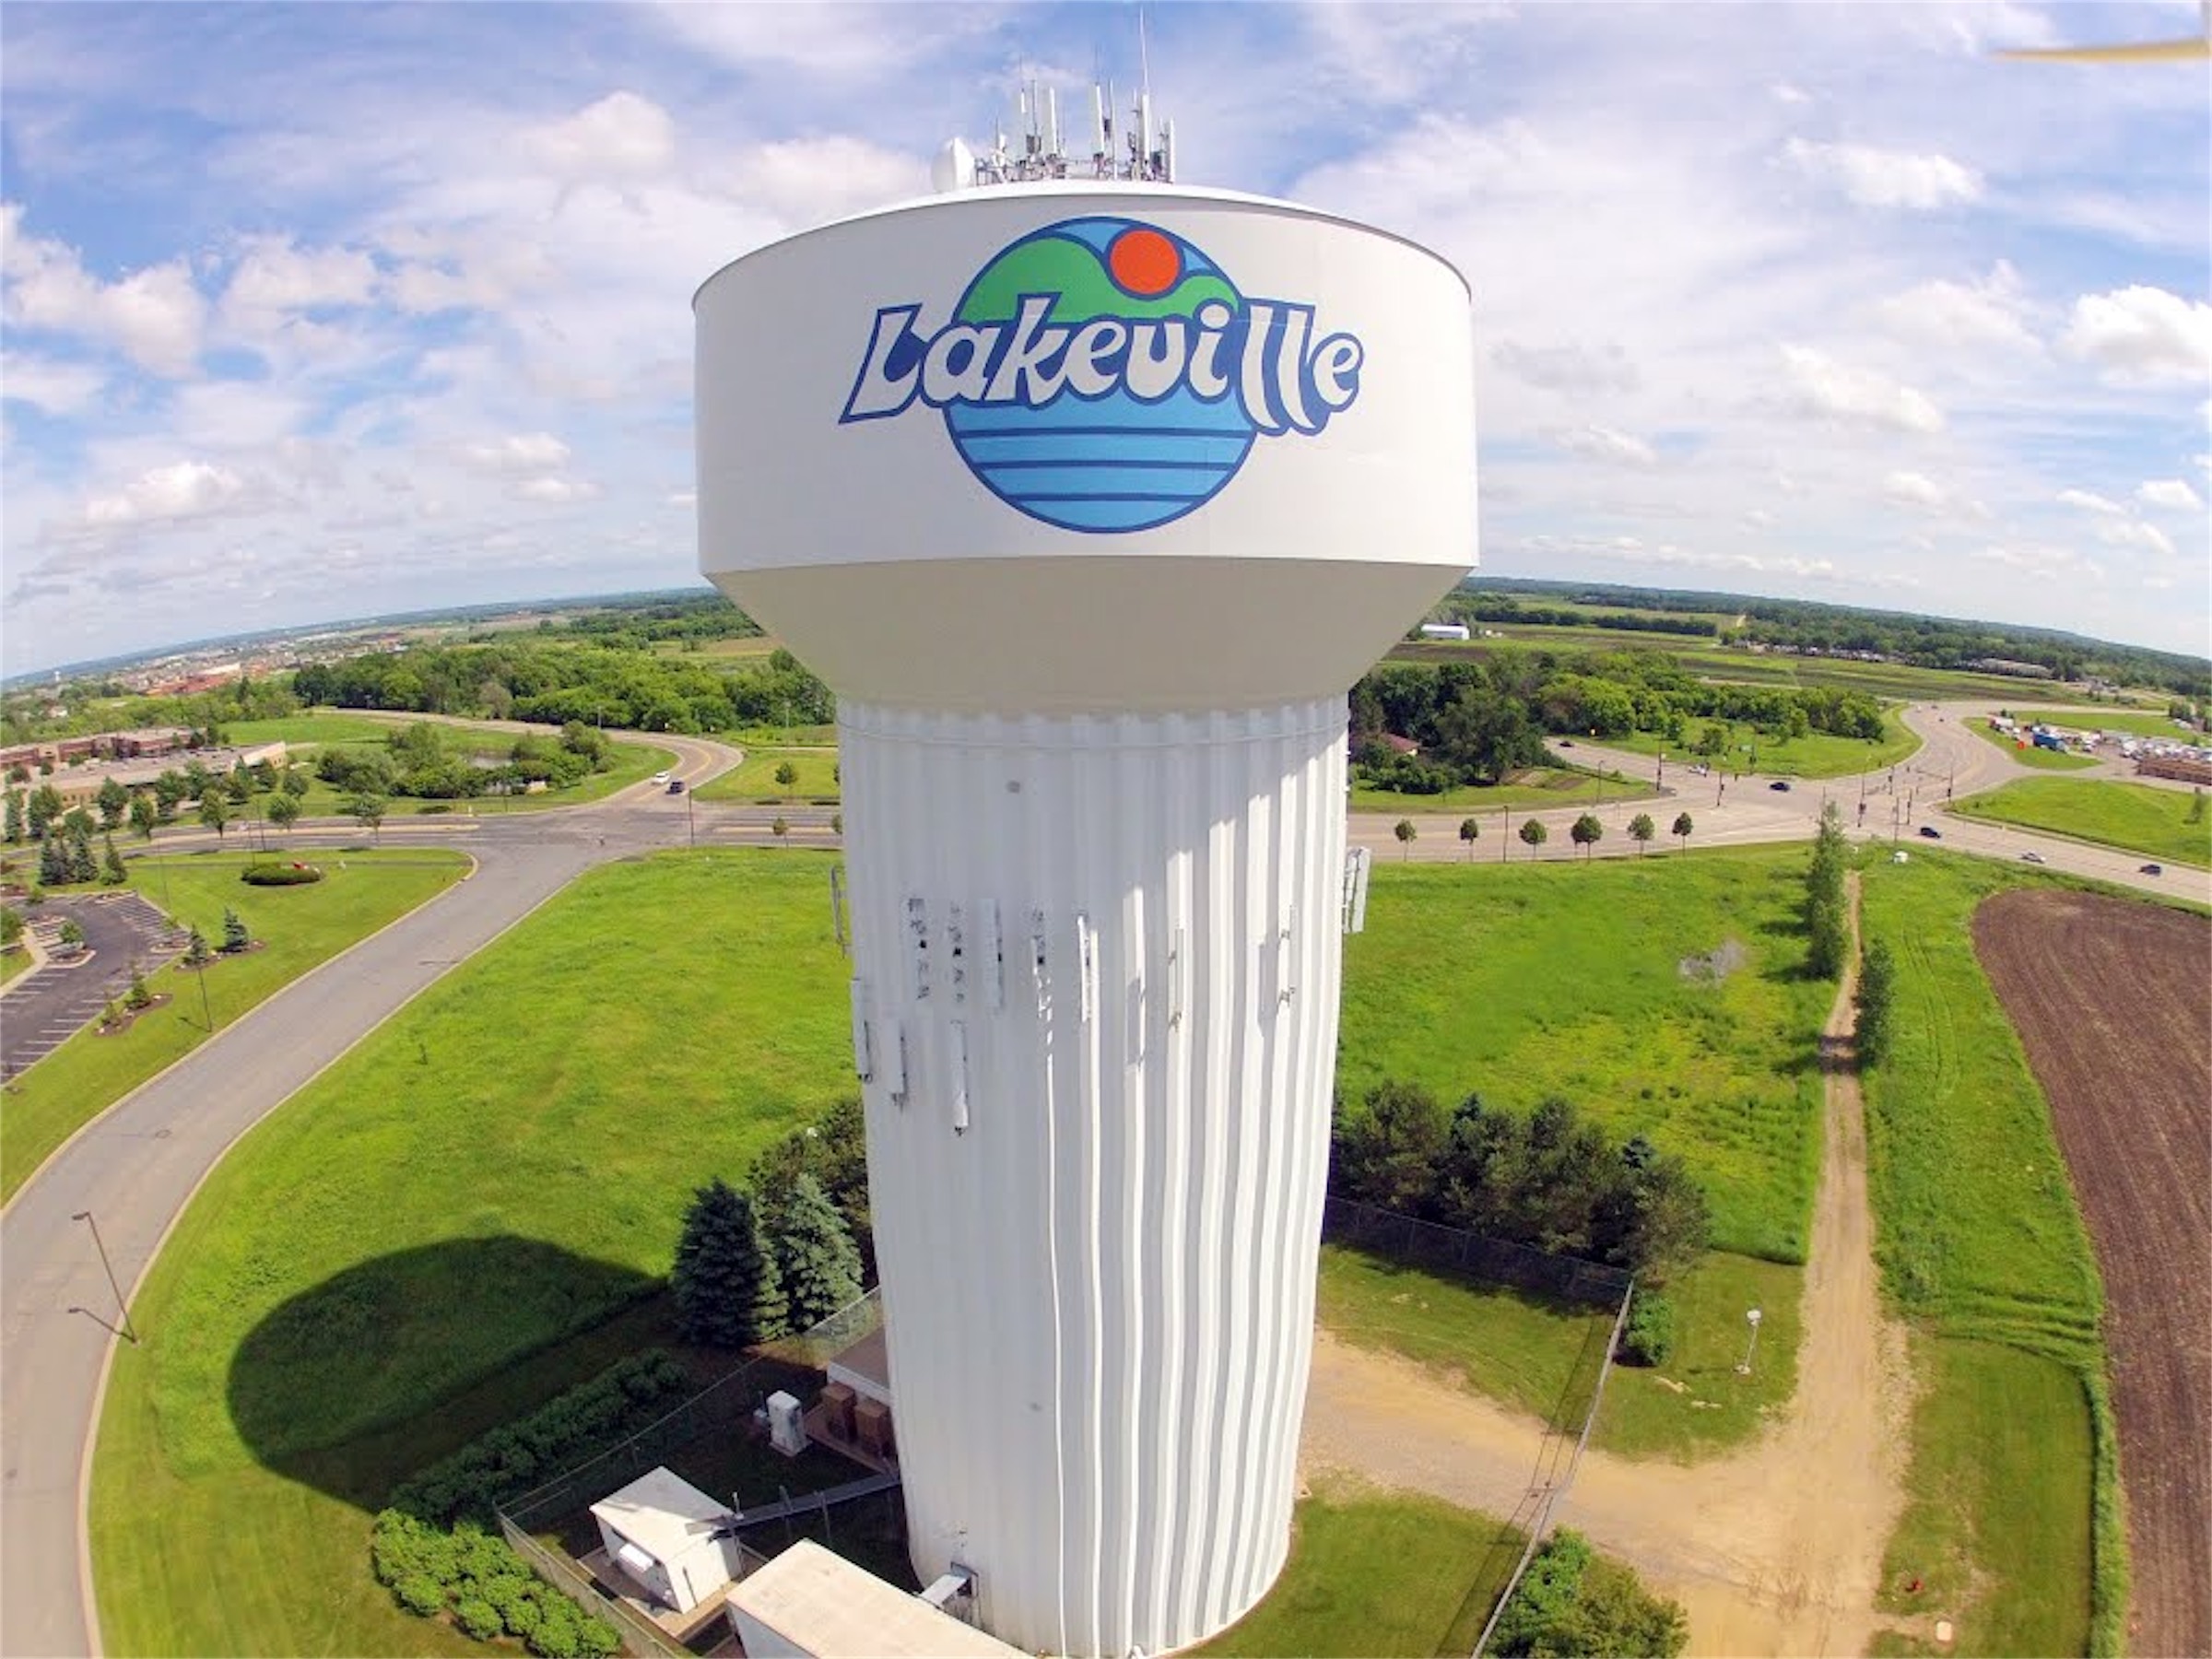 Lakeville MN water tower posted by Lakeville Realtor Travis Wyman